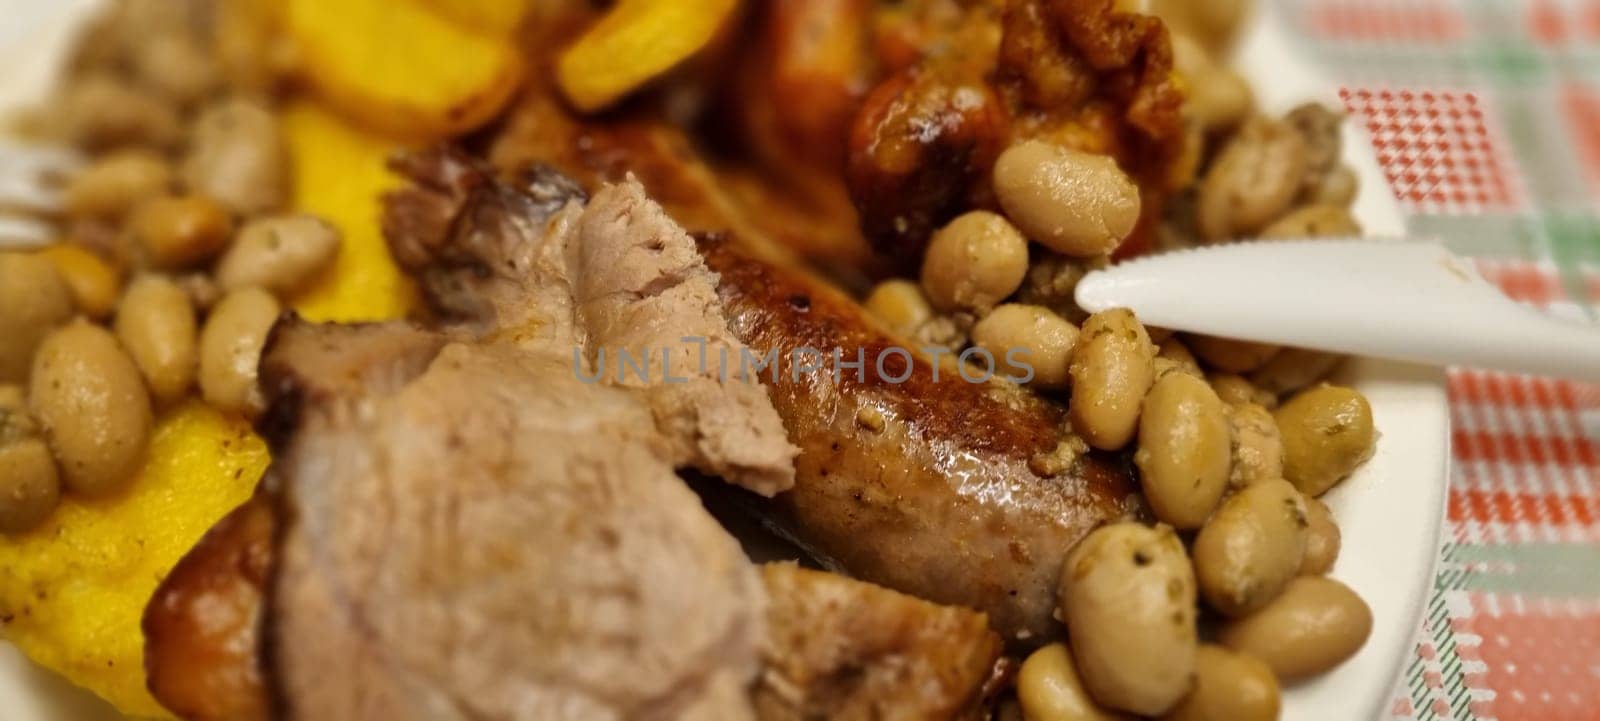 Close-up of a hearty rustic meal featuring grilled meat and beans in a cozy country-style setting, showcasing a comforting and nutritious homemade dish perfect for lunch or dinner